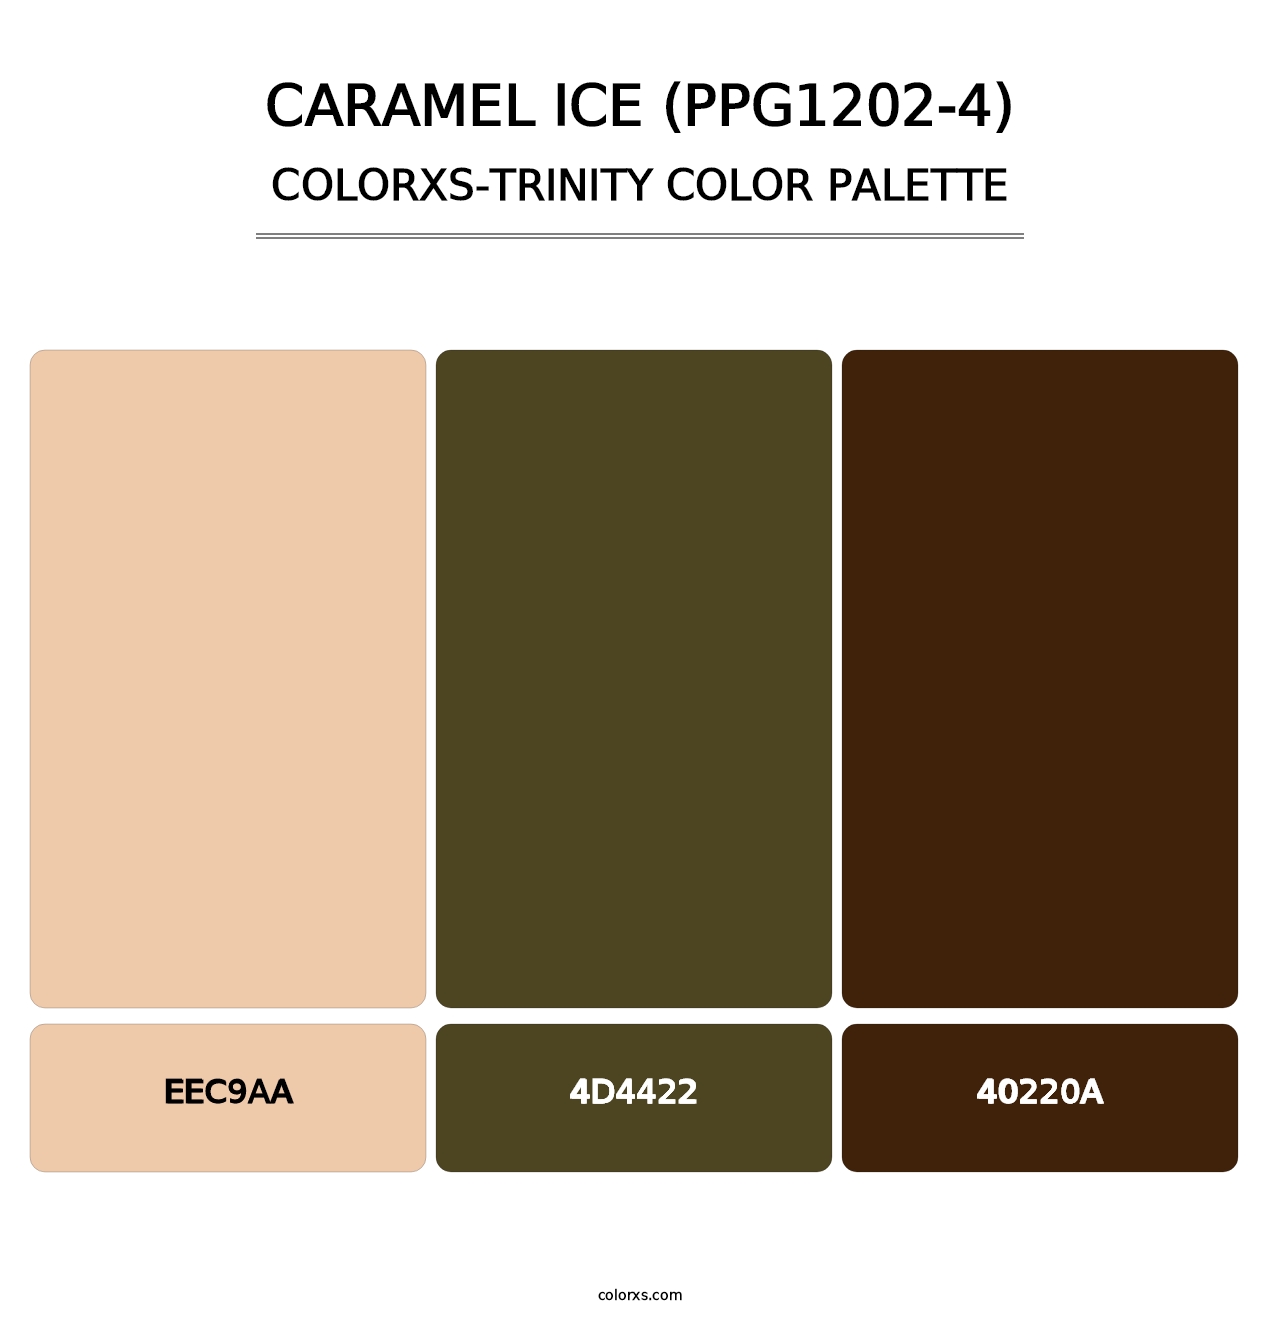 Caramel Ice (PPG1202-4) - Colorxs Trinity Palette